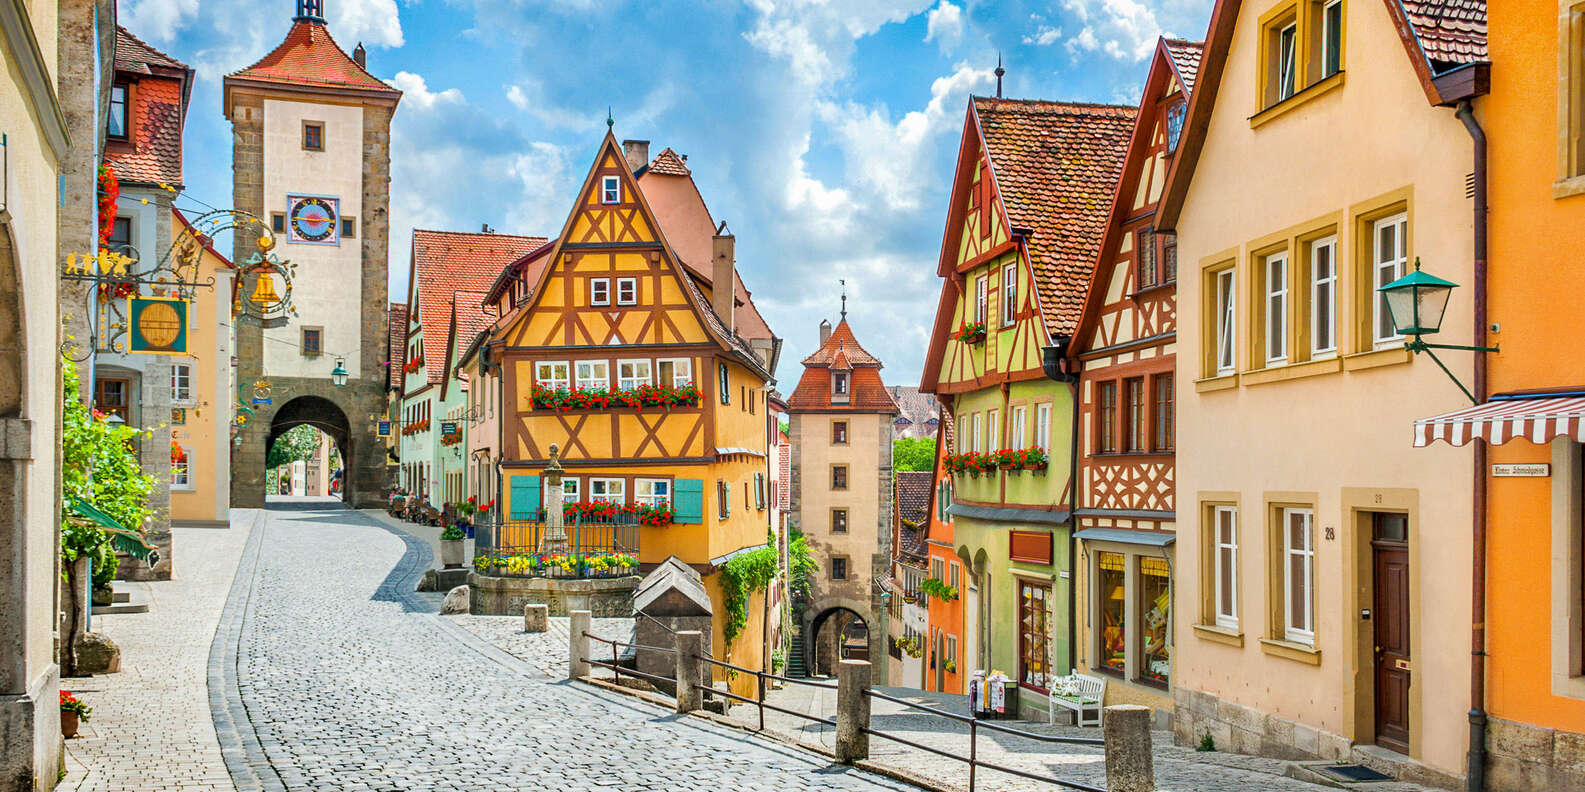 What to do in Rothenburg ob der Tauber